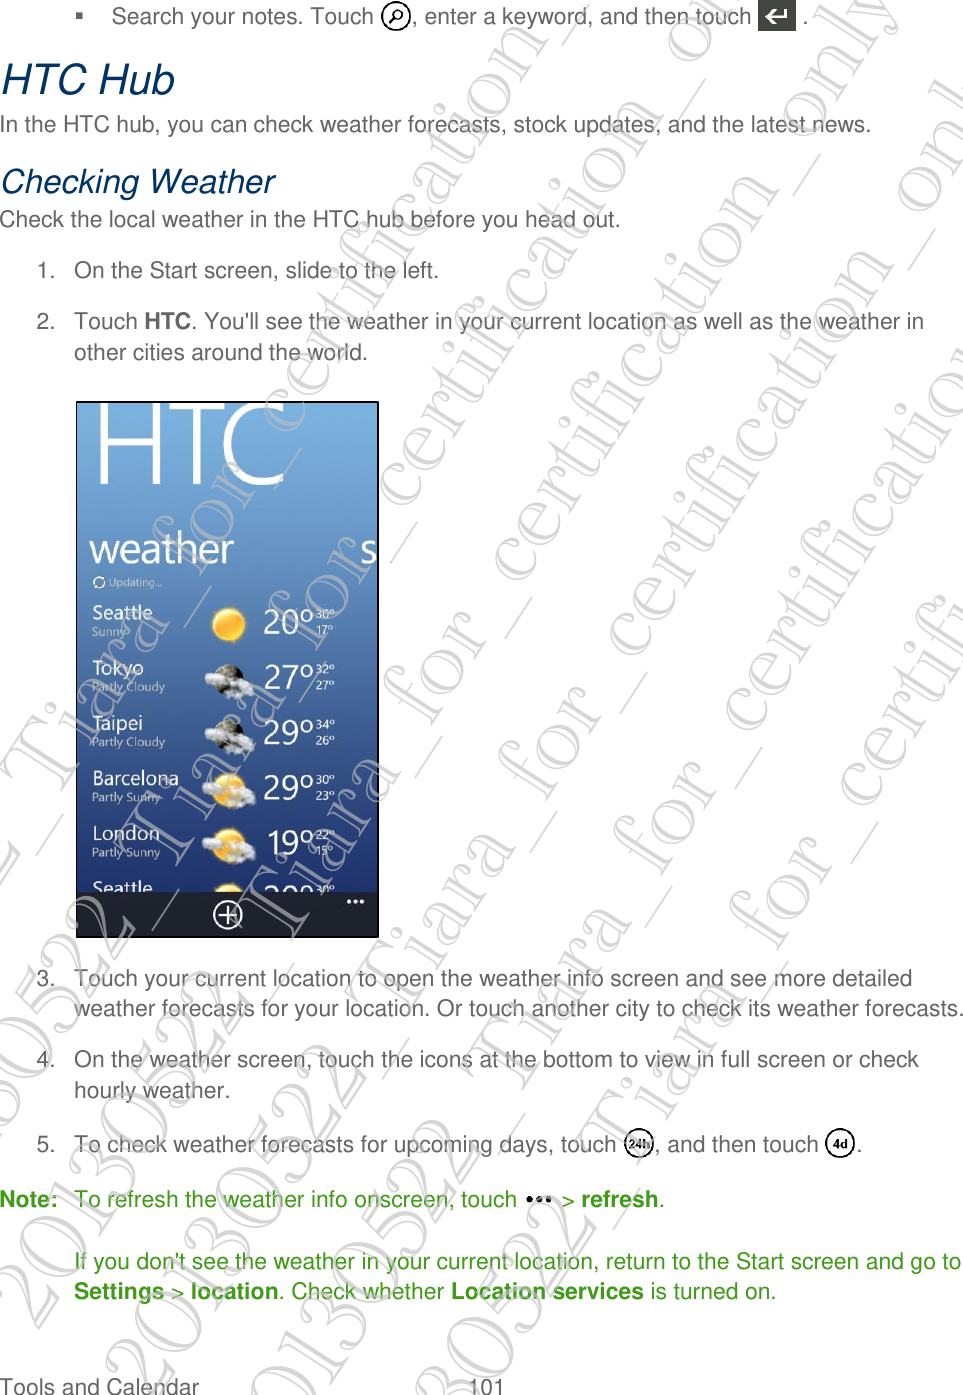  Tools and Calendar  101     Search your notes. Touch  , enter a keyword, and then touch   . HTC Hub In the HTC hub, you can check weather forecasts, stock updates, and the latest news. Checking Weather Check the local weather in the HTC hub before you head out. 1.  On the Start screen, slide to the left. 2.  Touch HTC. You&apos;ll see the weather in your current location as well as the weather in other cities around the world.   3.  Touch your current location to open the weather info screen and see more detailed weather forecasts for your location. Or touch another city to check its weather forecasts. 4.  On the weather screen, touch the icons at the bottom to view in full screen or check hourly weather. 5.  To check weather forecasts for upcoming days, touch  , and then touch  . Note:  To refresh the weather info onscreen, touch   &gt; refresh.  If you don&apos;t see the weather in your current location, return to the Start screen and go to Settings &gt; location. Check whether Location services is turned on. 20130522_Tiara_for_certification_only 20130522_Tiara_for_certification_only 20130522_Tiara_for_certification_only 20130522_Tiara_for_certification_only 20130522_Tiara_for_certification_only 20130522_Tiara_for_certification_only